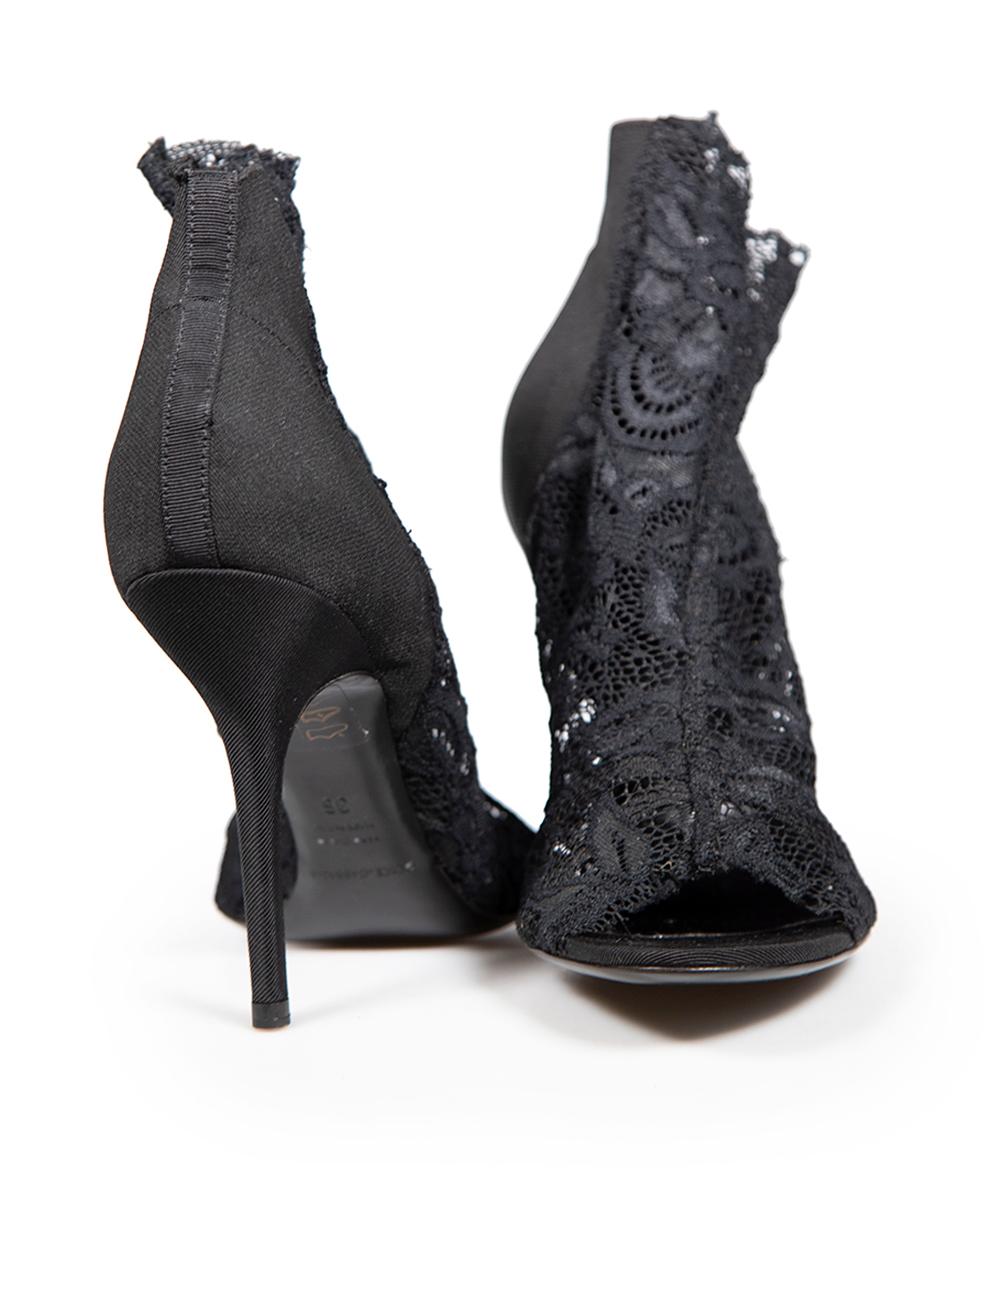 Dolce & Gabbana Black Lace Panelled Heels Size IT 36 In Good Condition For Sale In London, GB